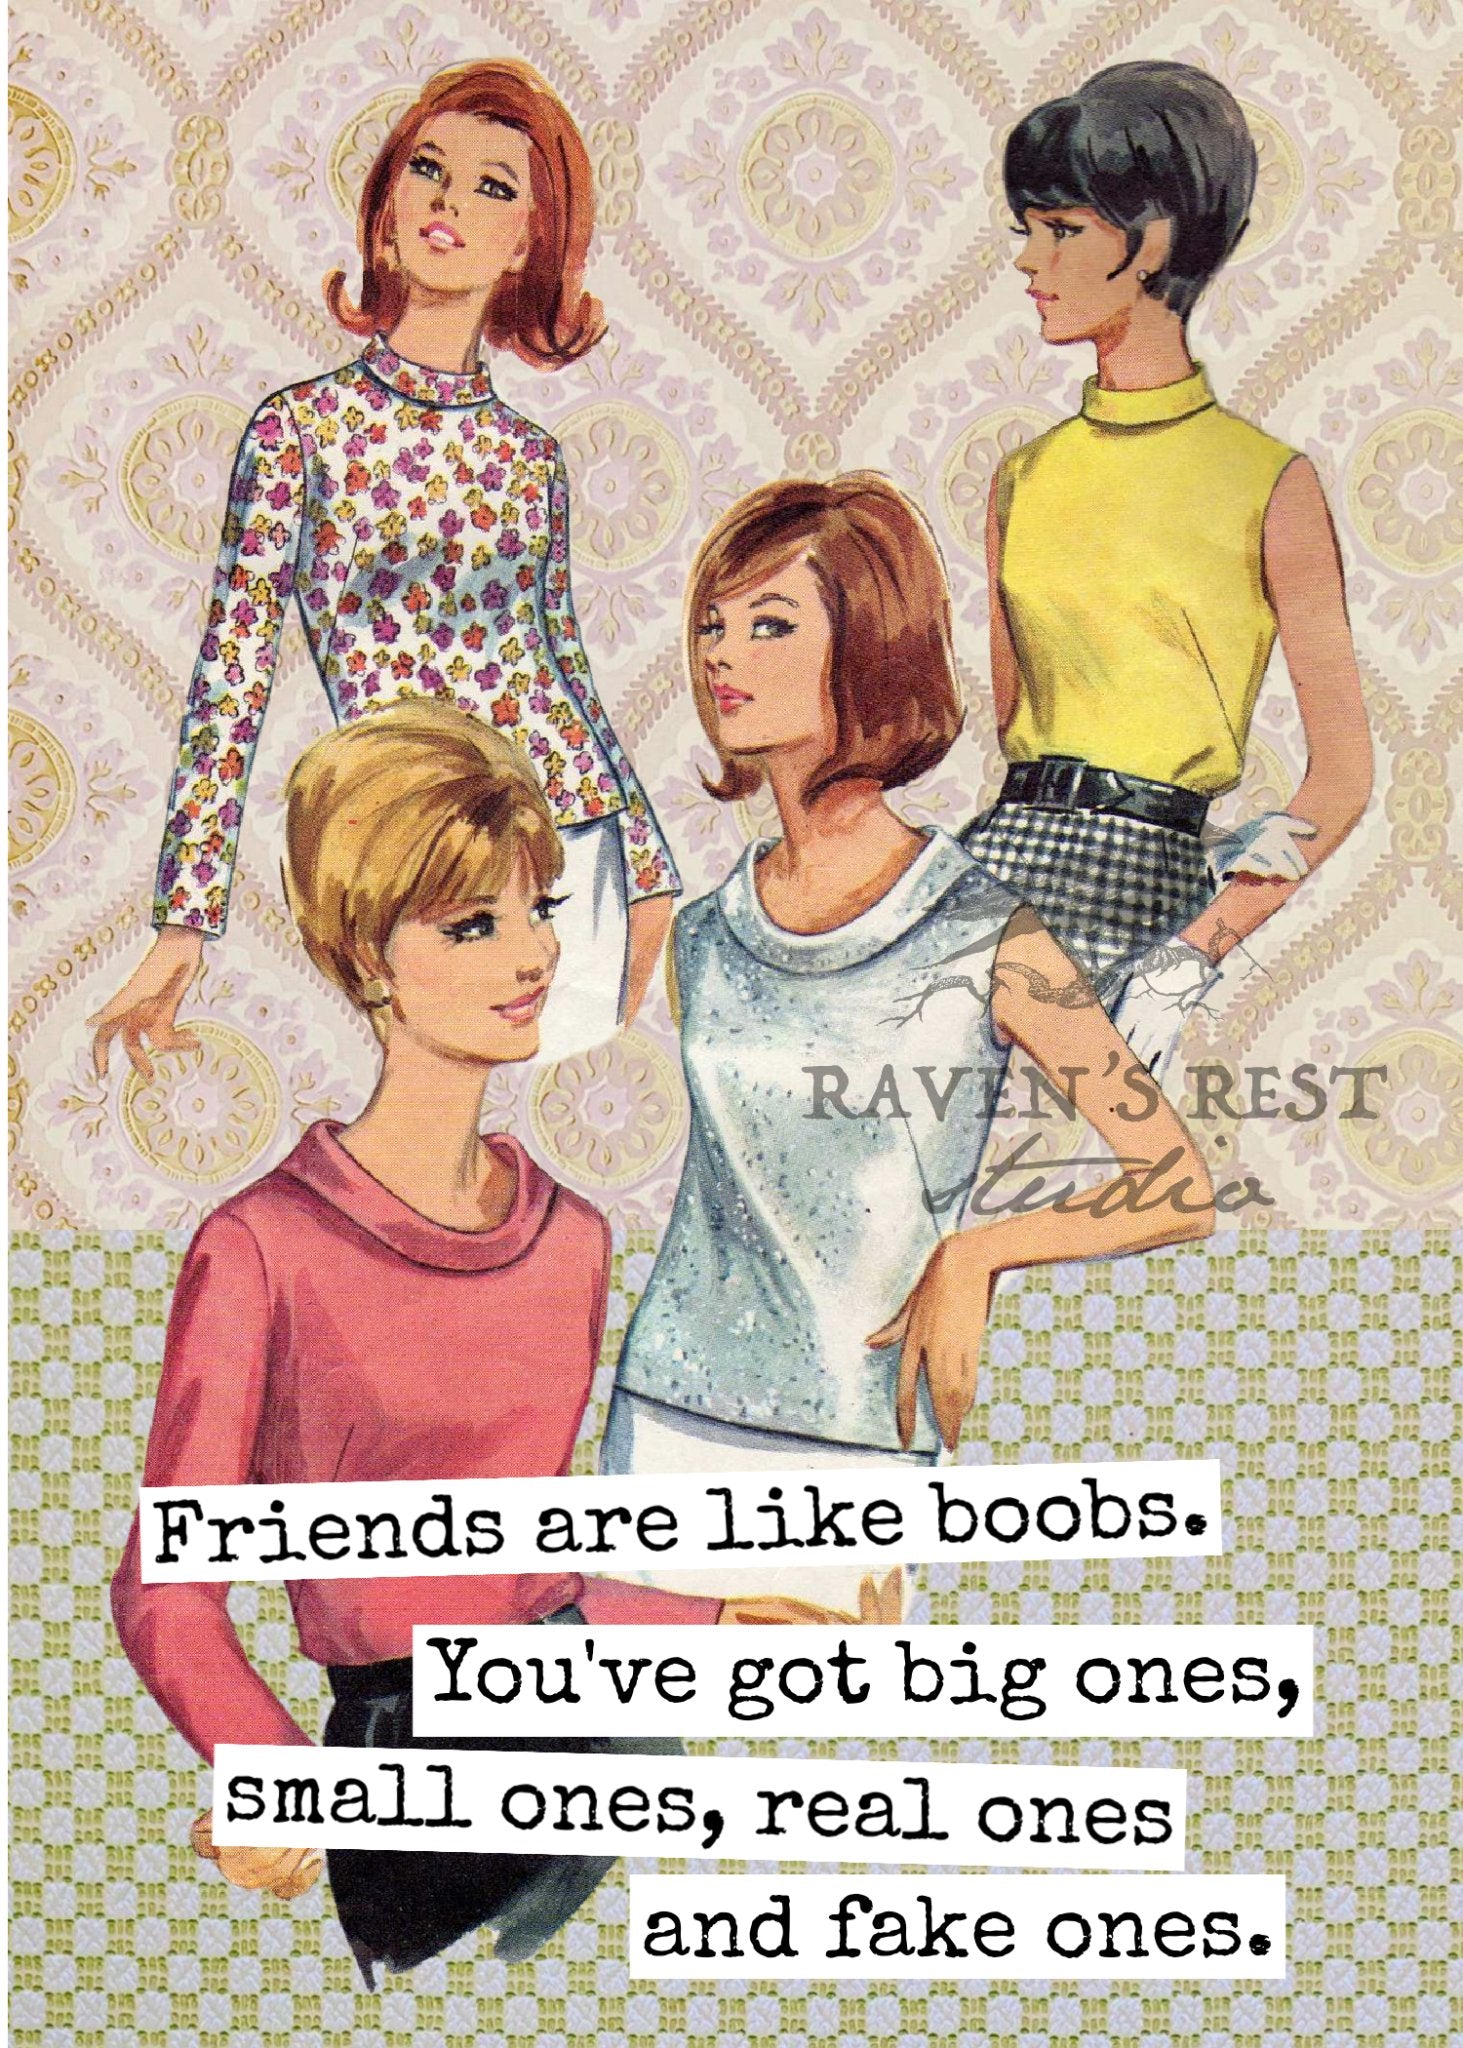 Friends Are Like Boobs. You've Got Big Ones, Small Ones... - My Filosophy